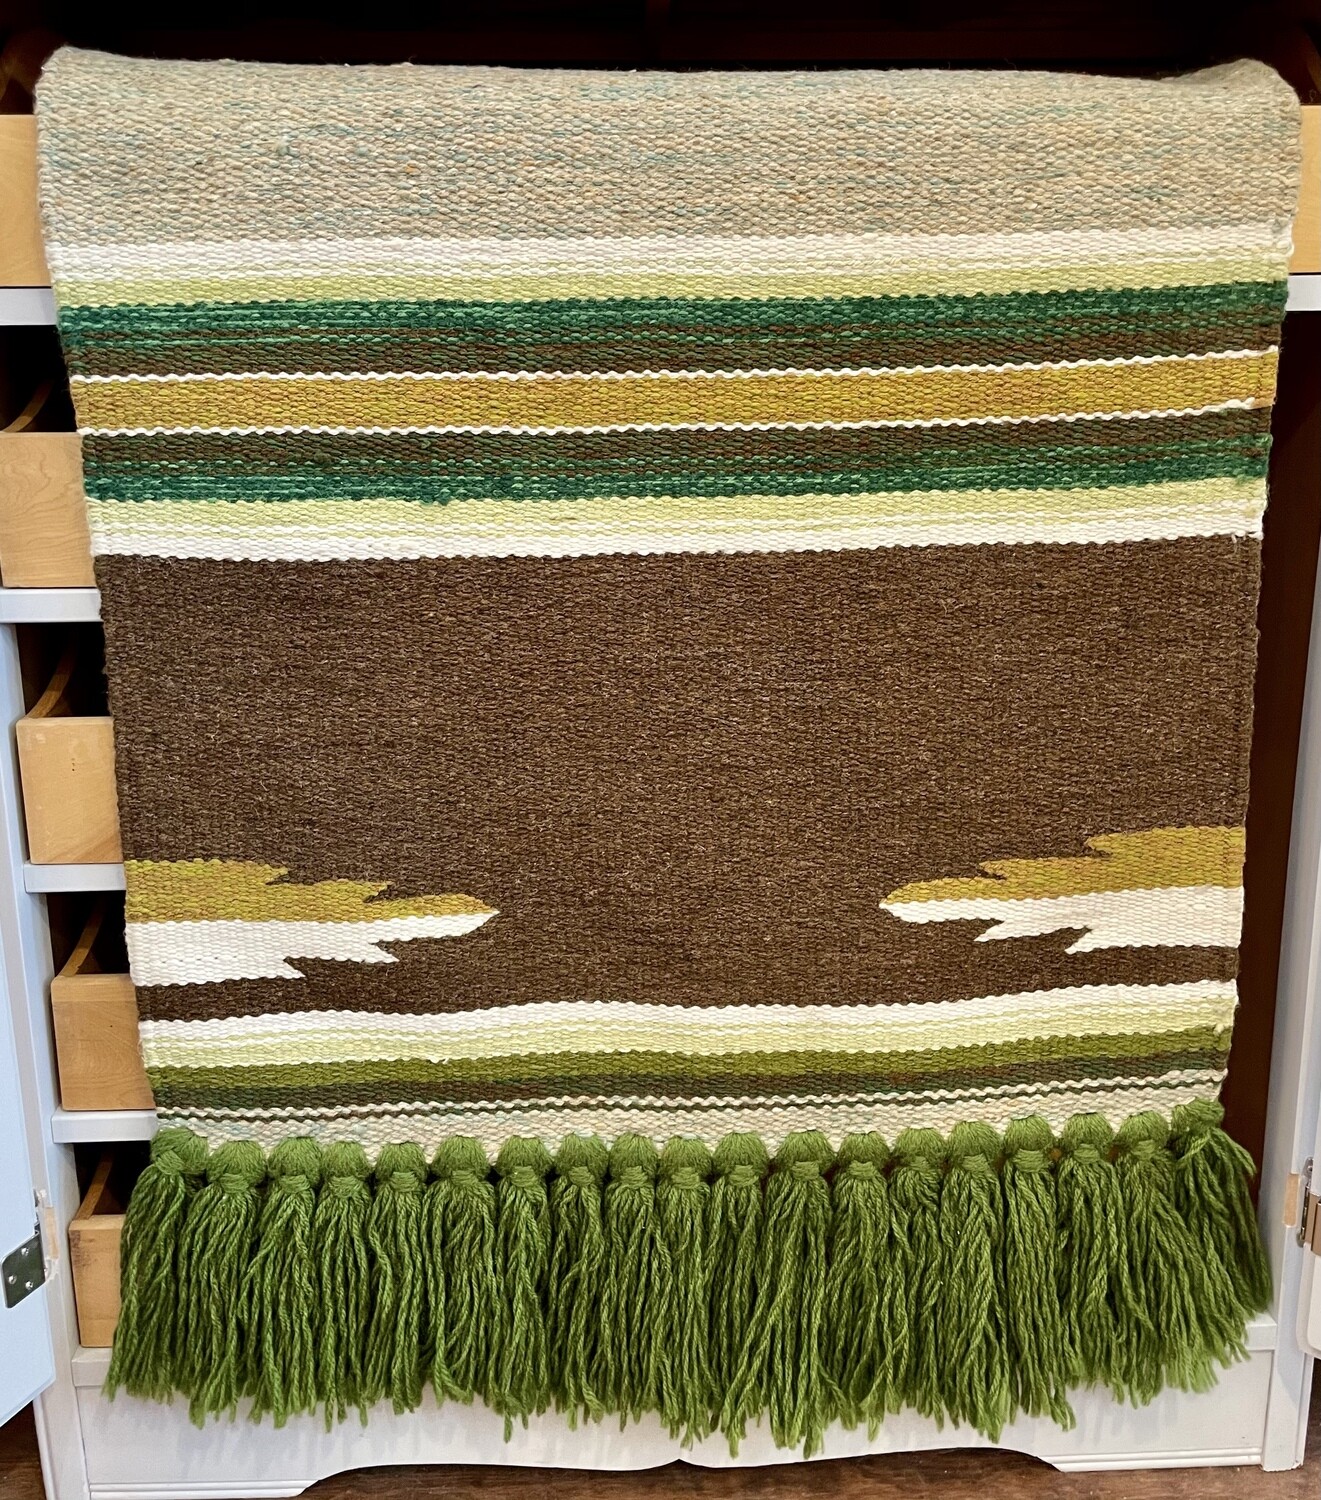 Southwest Woven Wall Hanging 29” x 72” 